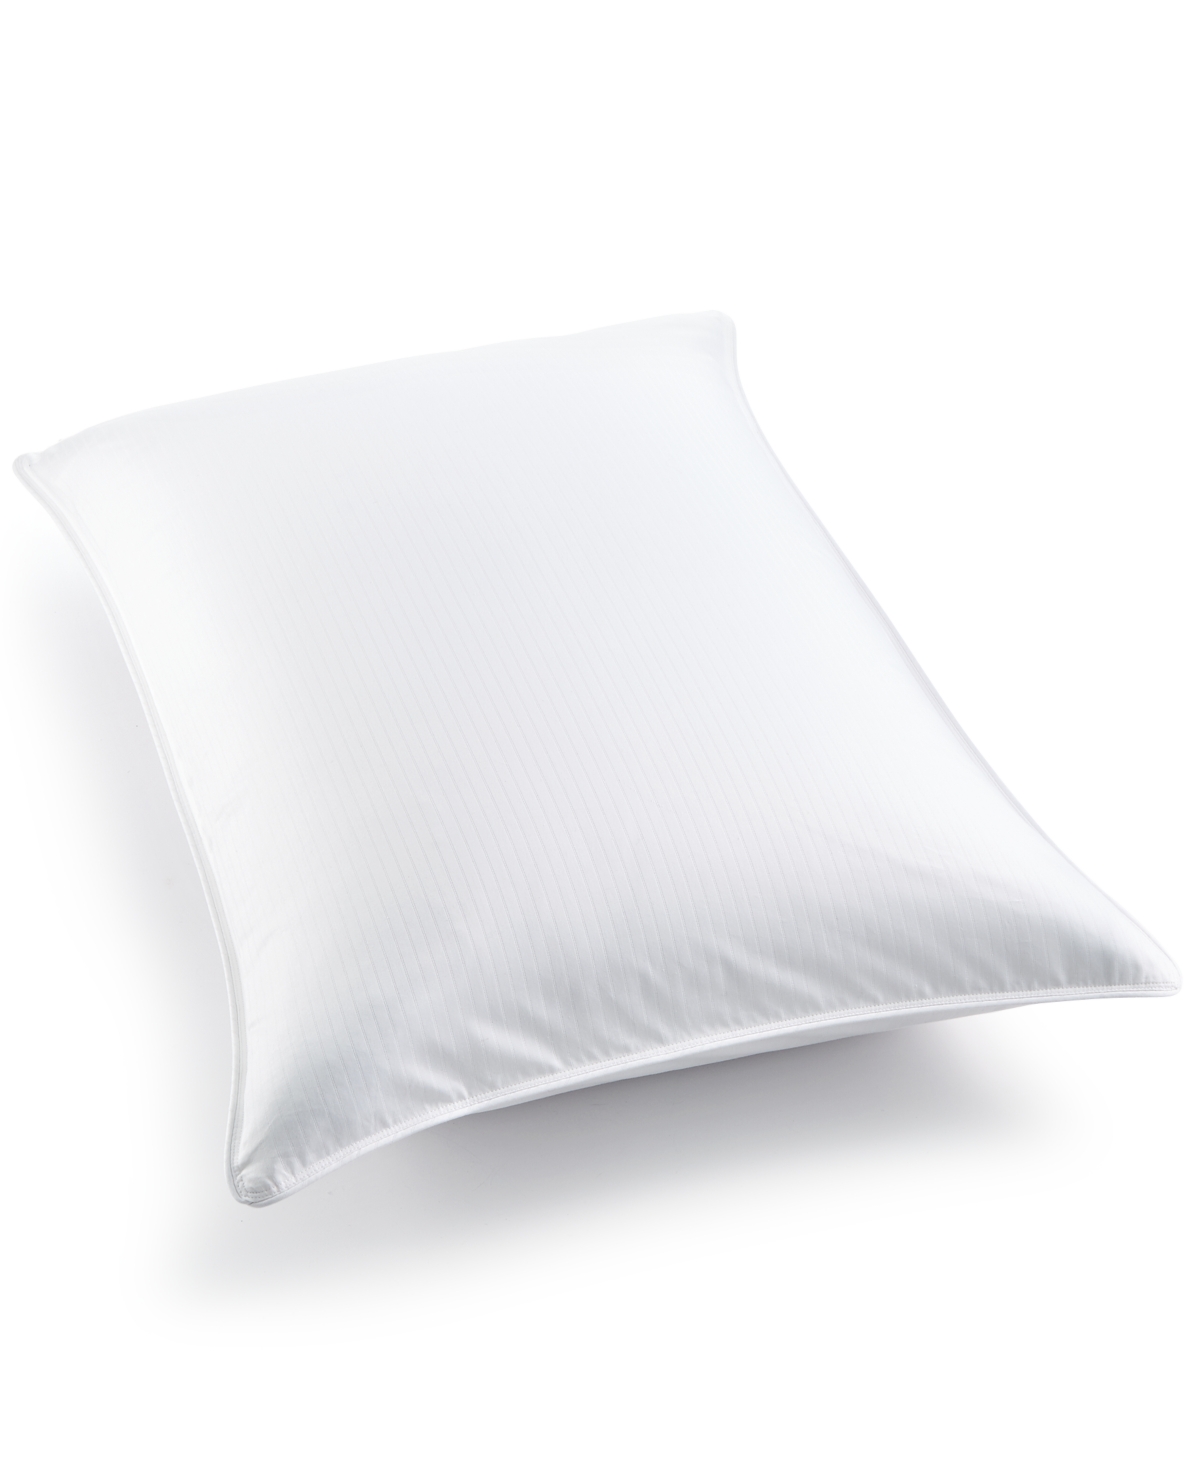 Charter Club White Down Firm Density Pillow, Standard/queen, Created For Macy's